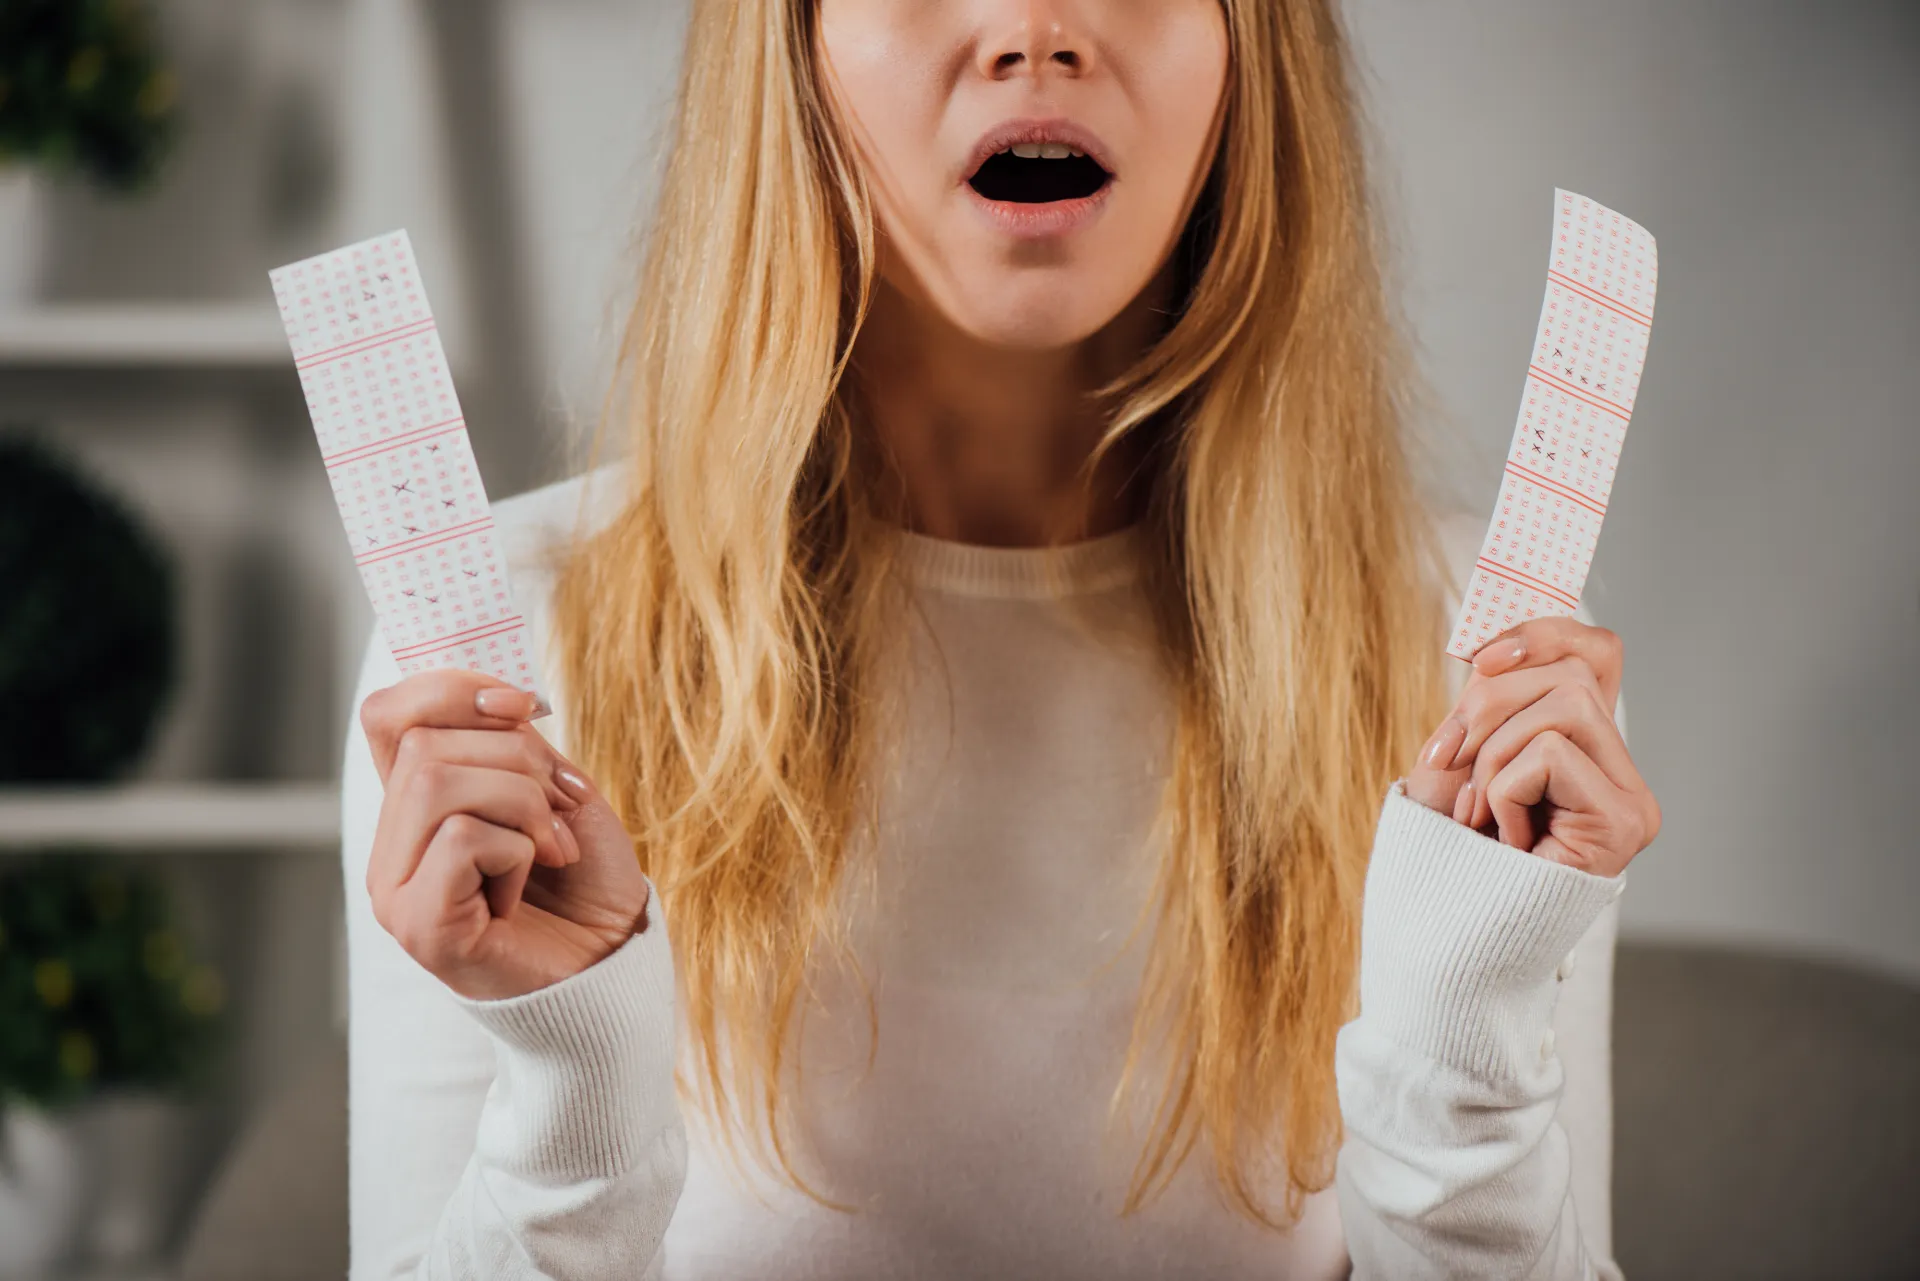 a lady holding two tickets with bonus number and won mega millions against the odds. her chances of winning from one ticket have happened right on point.